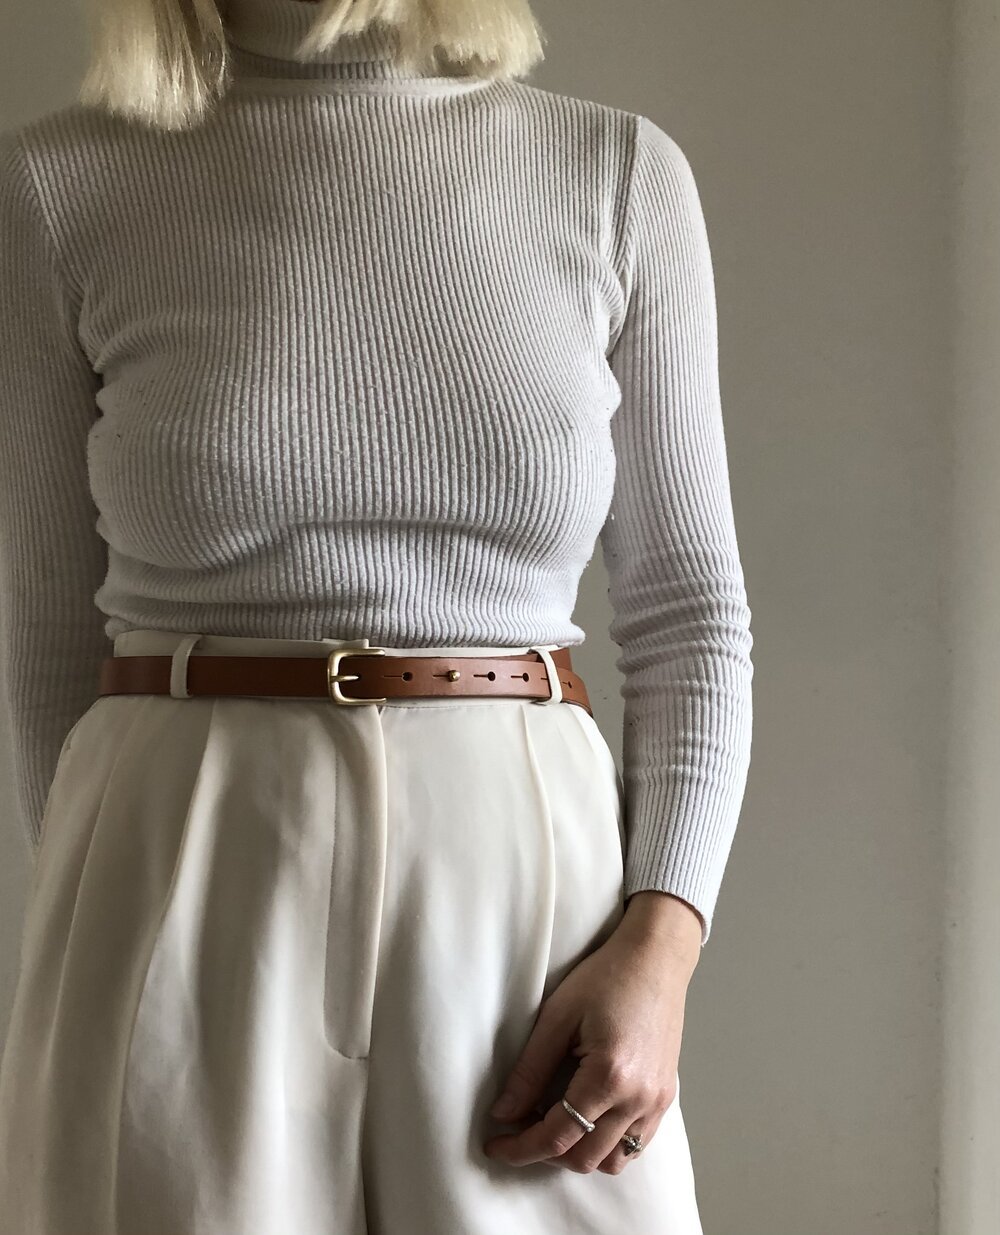 CARV sustainable leather belt handmade in the UK.